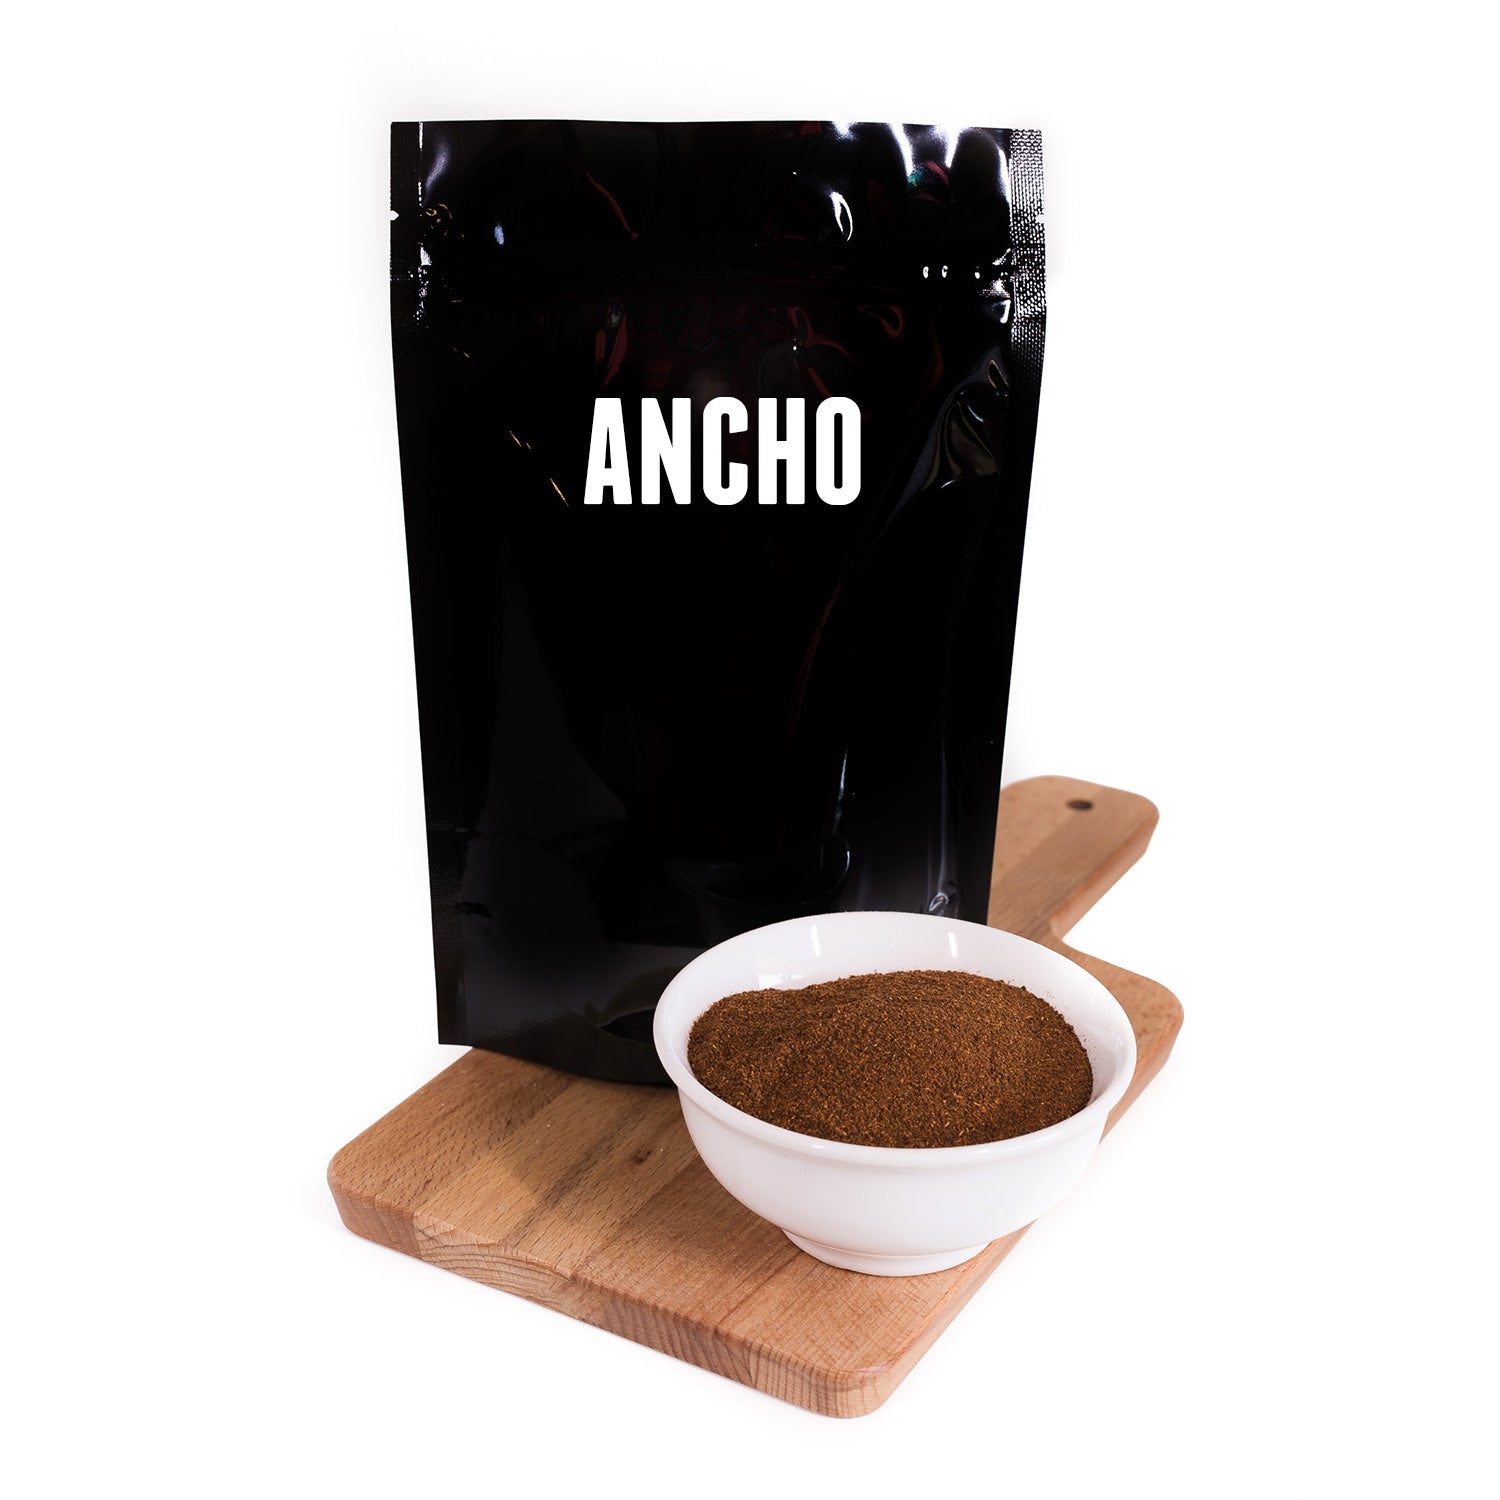 Bag of Ancho Spice